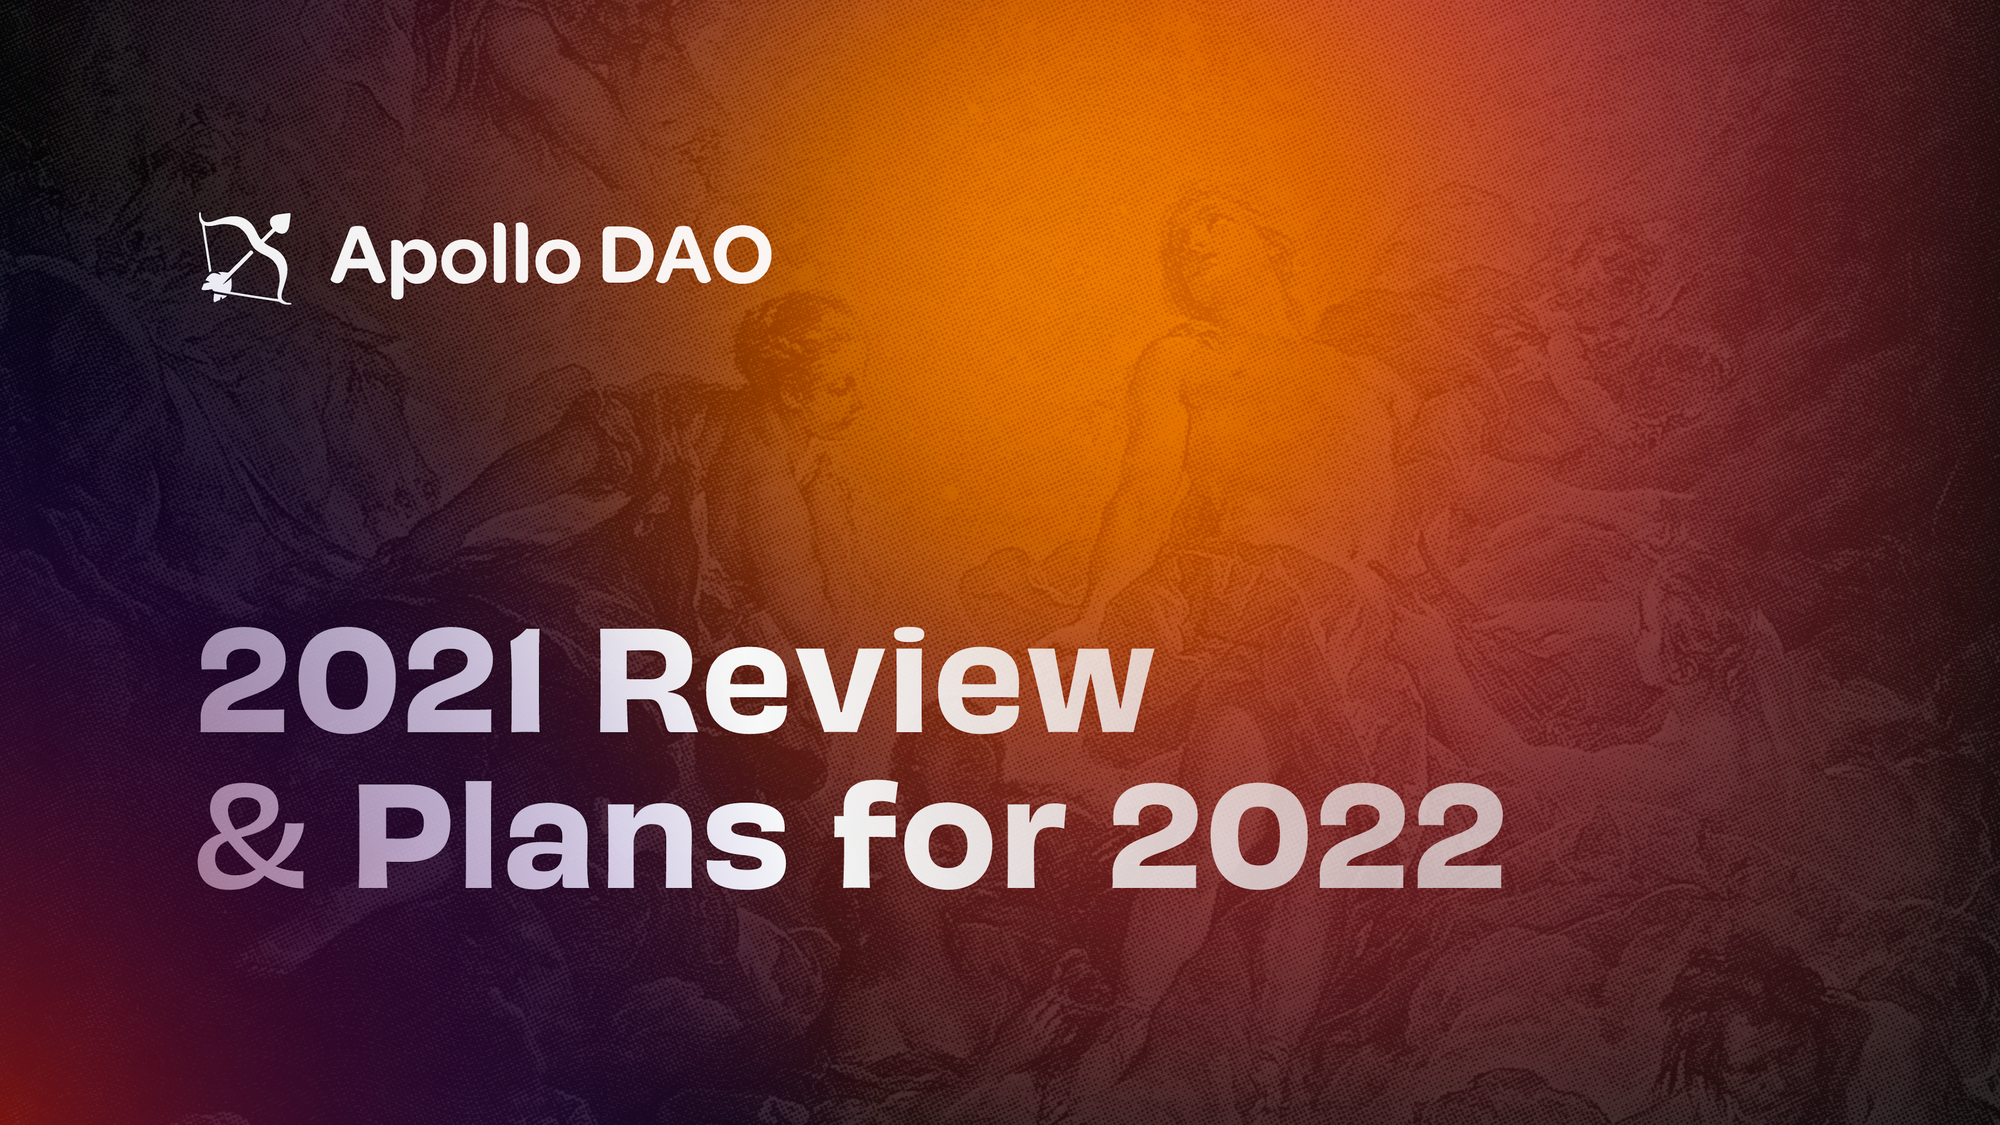 Apollo DAO, 2021 Review and Plans for 2022.